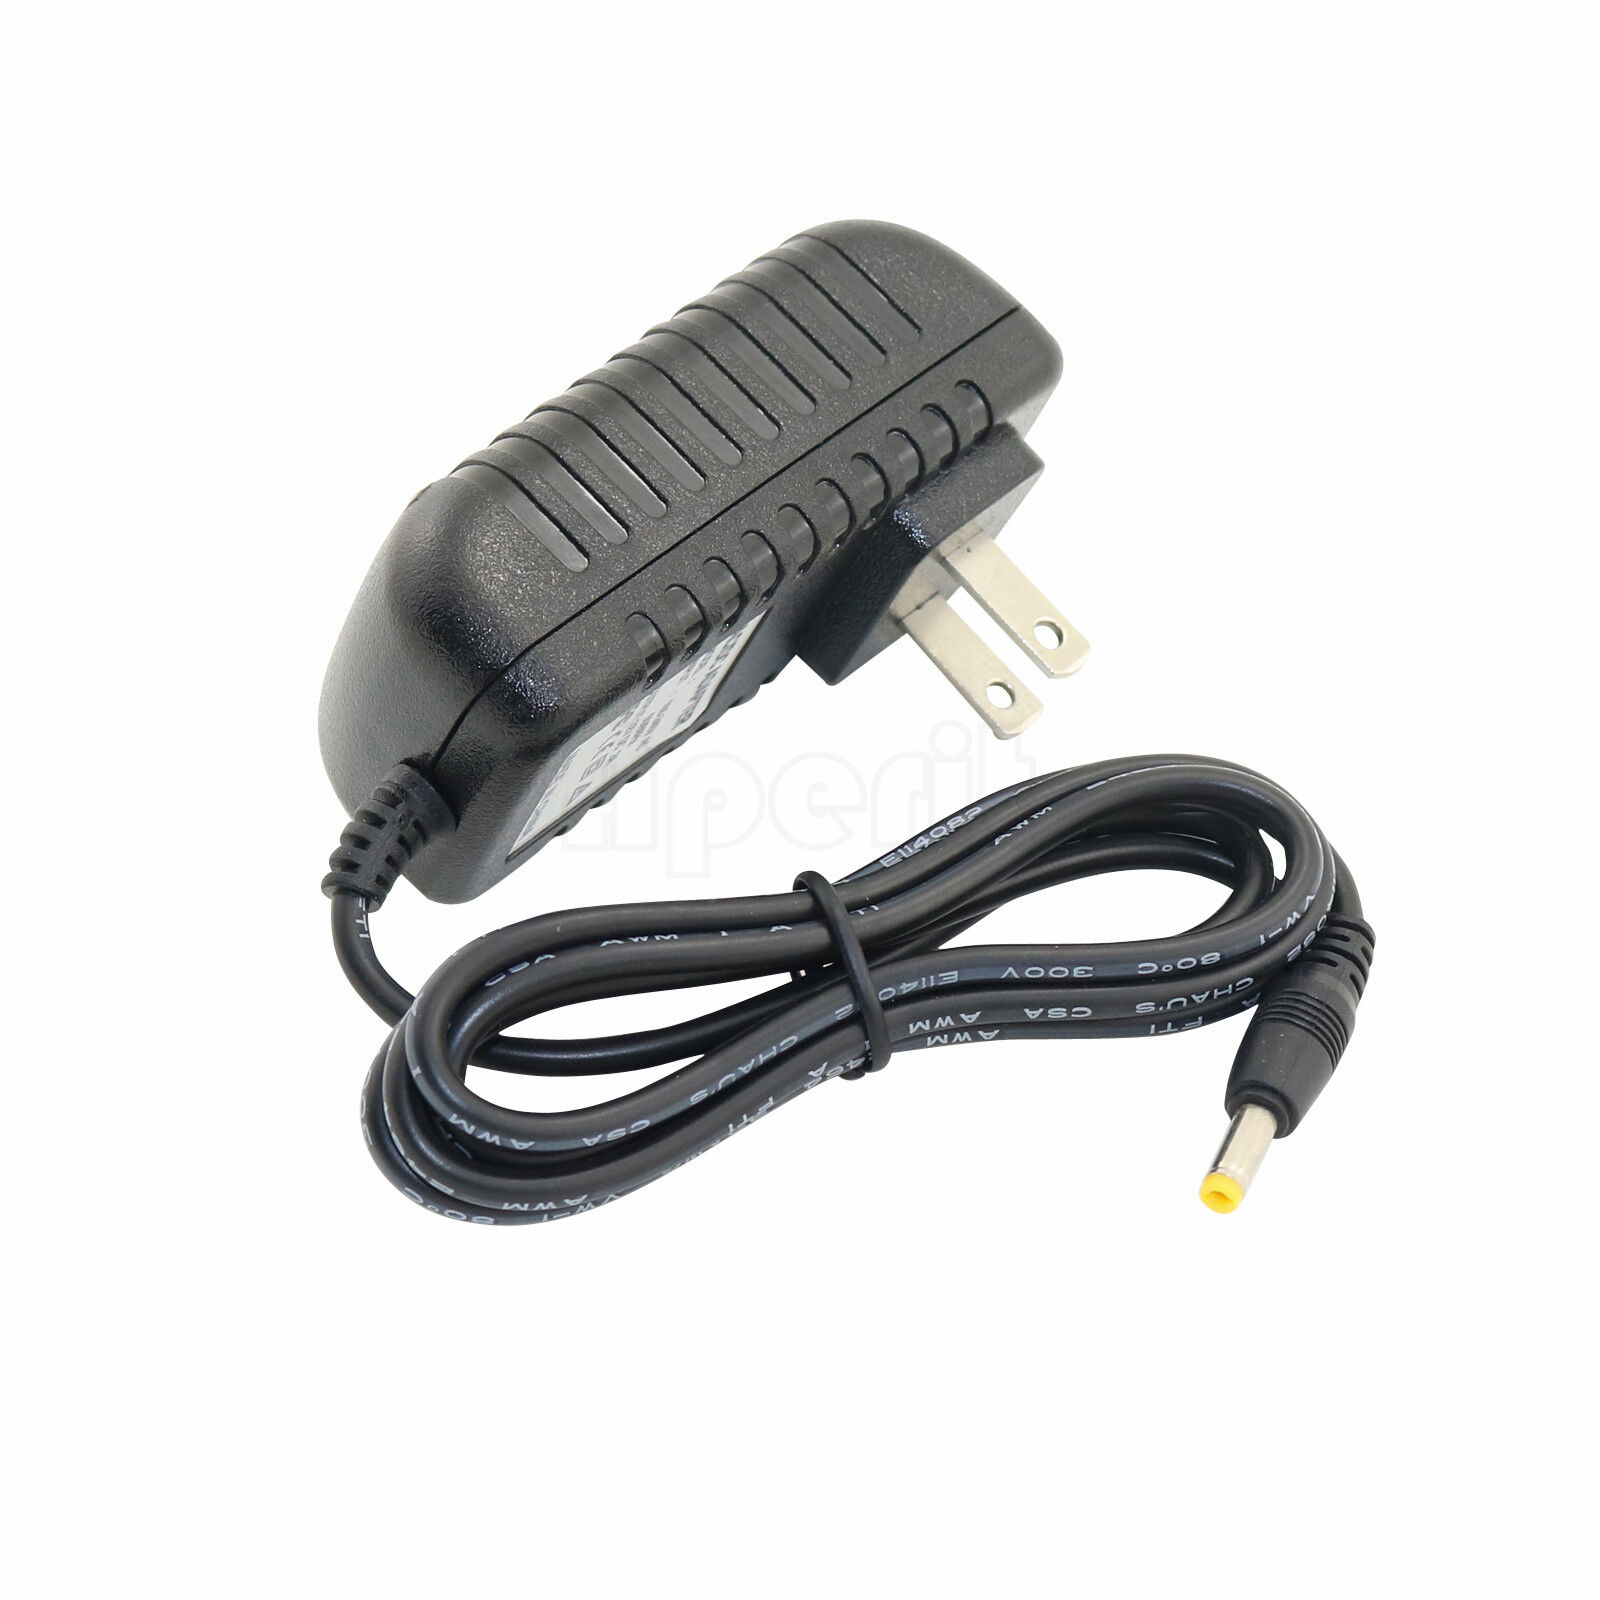 12.6V 1A Charger With DC connector for 10.8V 11.1V 12V 3S LI-ION BATTERY MPN Does not apply Voltage 12 V Unit Type - Click Image to Close